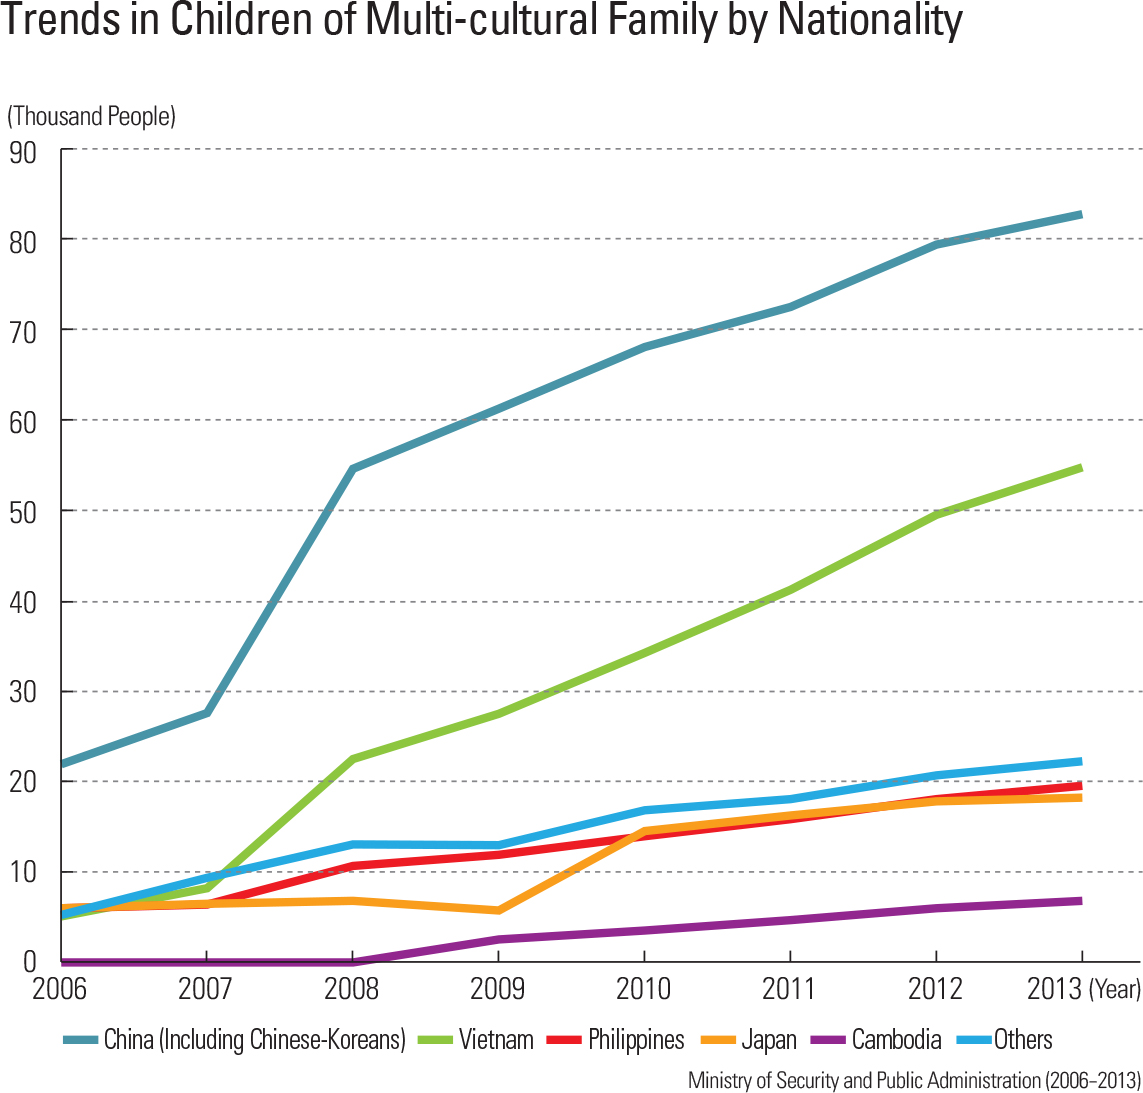  Trends in Children of Multi-cultural Family by Nationality